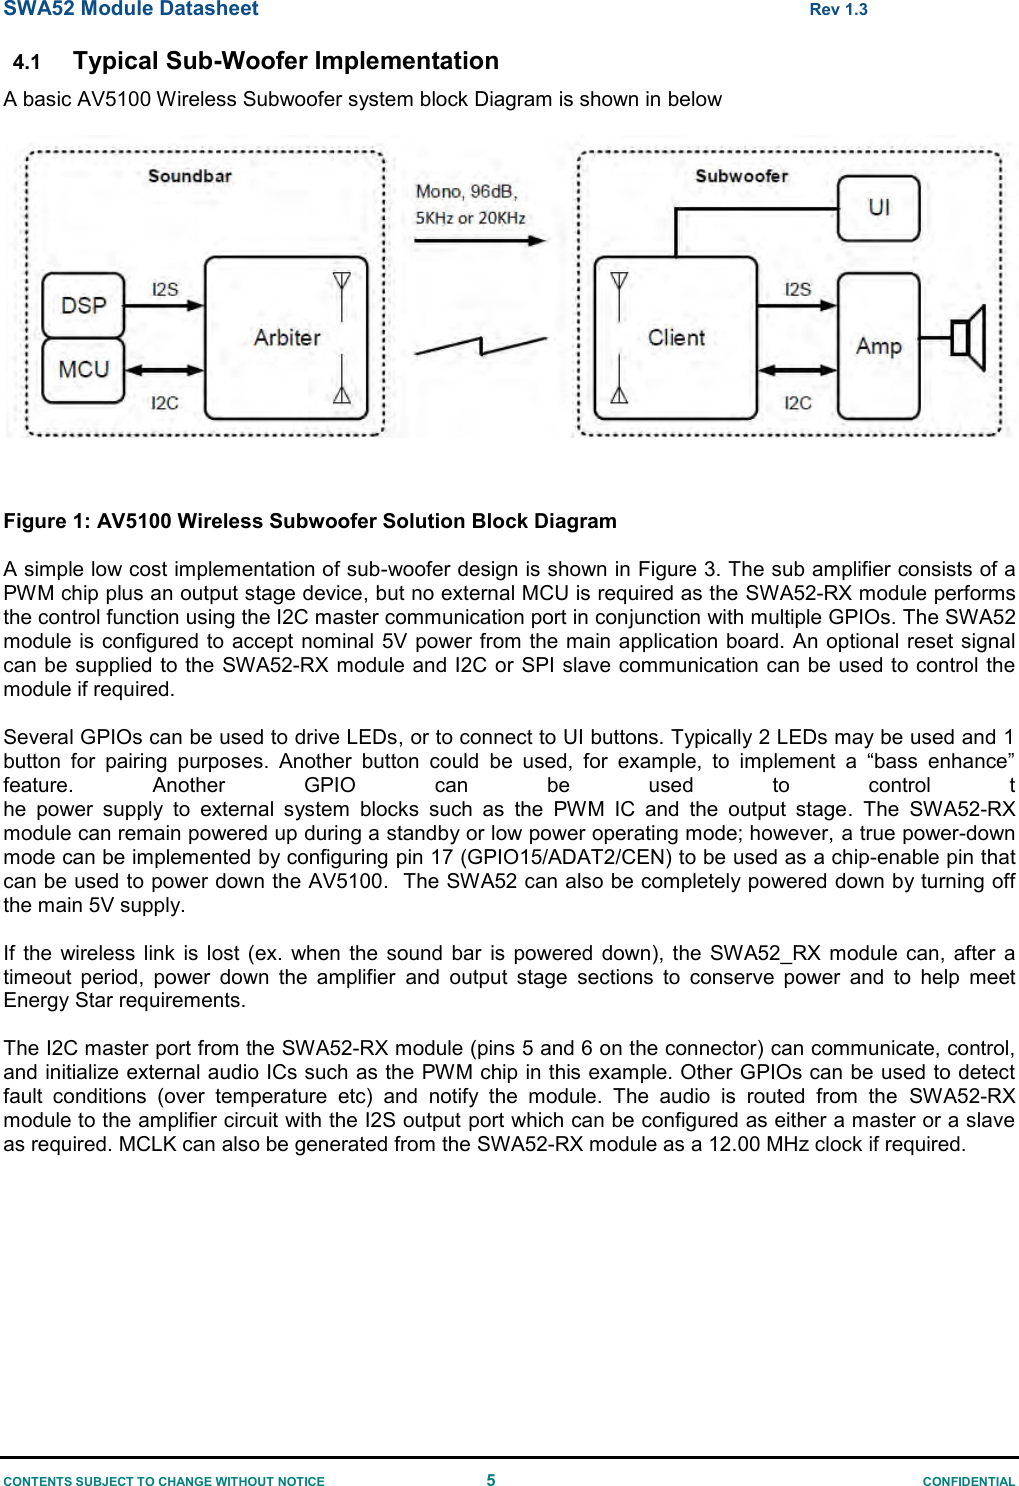 SWA52 Module Datasheet  Rev 1.3 CONTENTS SUBJECT TO CHANGE WITHOUT NOTICE  5  CONFIDENTIAL 4.1 Typical Sub-Woofer Implementation A basic AV5100 Wireless Subwoofer system block Diagram is shown in below     Figure 1: AV5100 Wireless Subwoofer Solution Block Diagram   A simple low cost implementation of sub-woofer design is shown in Figure 3. The sub amplifier consists of a PWM chip plus an output stage device, but no external MCU is required as the SWA52-RX module performs the control function using the I2C master communication port in conjunction with multiple GPIOs. The SWA52 module is configured to accept nominal 5V power from the main application board. An optional reset signal can be  supplied to the SWA52-RX  module and I2C or SPI slave communication can be used to control the module if required.   Several GPIOs can be used to drive LEDs, or to connect to UI buttons. Typically 2 LEDs may be used and 1 button  for  pairing  purposes.  Another  button  could  be  used,  for  example,  to  implement  a  “bass  enhance” feature.  Another  GPIO  can  be  used  to  control  the  power  supply  to  external  system  blocks  such  as  the  PWM  IC  and  the  output  stage.  The  SWA52-RX module can remain powered up during a standby or low power operating mode; however, a true power-down mode can be implemented by configuring pin 17 (GPIO15/ADAT2/CEN) to be used as a chip-enable pin that can be used to power down the AV5100.  The SWA52 can also be completely powered down by turning off the main 5V supply.   If  the  wireless  link  is  lost  (ex.  when  the  sound  bar  is  powered  down),  the  SWA52_RX module can,  after  a timeout  period,  power  down  the  amplifier  and  output  stage  sections  to  conserve  power  and  to  help  meet Energy Star requirements.  The I2C master port from the SWA52-RX module (pins 5 and 6 on the connector) can communicate, control, and initialize external audio ICs such as the PWM chip in this example. Other GPIOs can be used to detect fault  conditions  (over  temperature  etc)  and  notify  the  module.  The  audio  is  routed  from  the  SWA52-RX module to the amplifier circuit with the I2S output port which can be configured as either a master or a slave as required. MCLK can also be generated from the SWA52-RX module as a 12.00 MHz clock if required.   